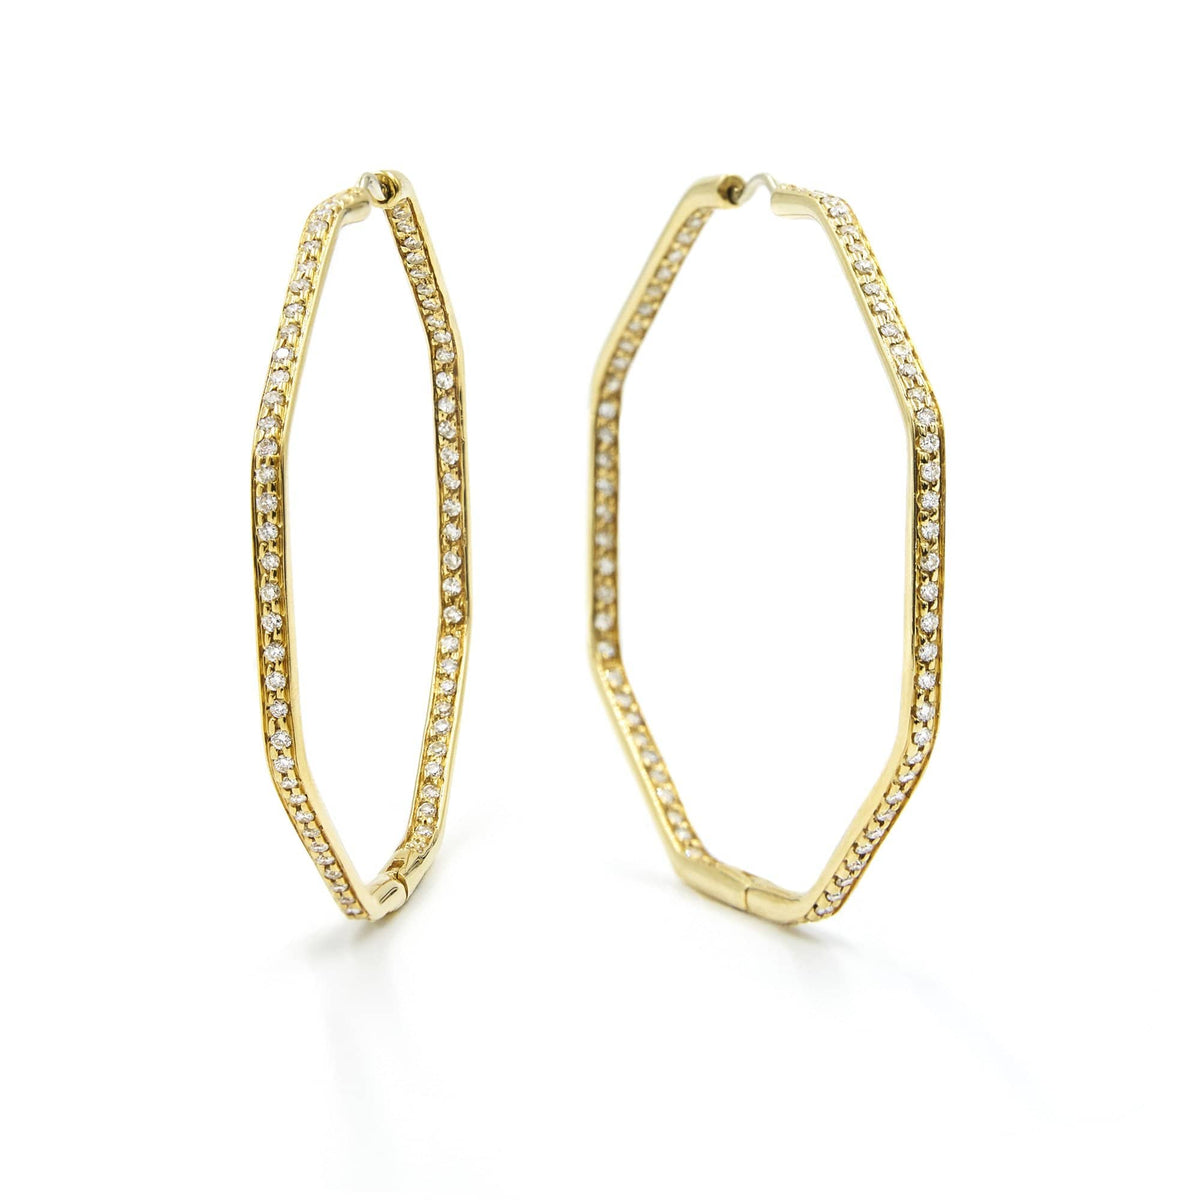 CHRIS AIRE HOOP-DIAMOND EARRINGS - Chris Aire Fine Jewelry & Timepieces